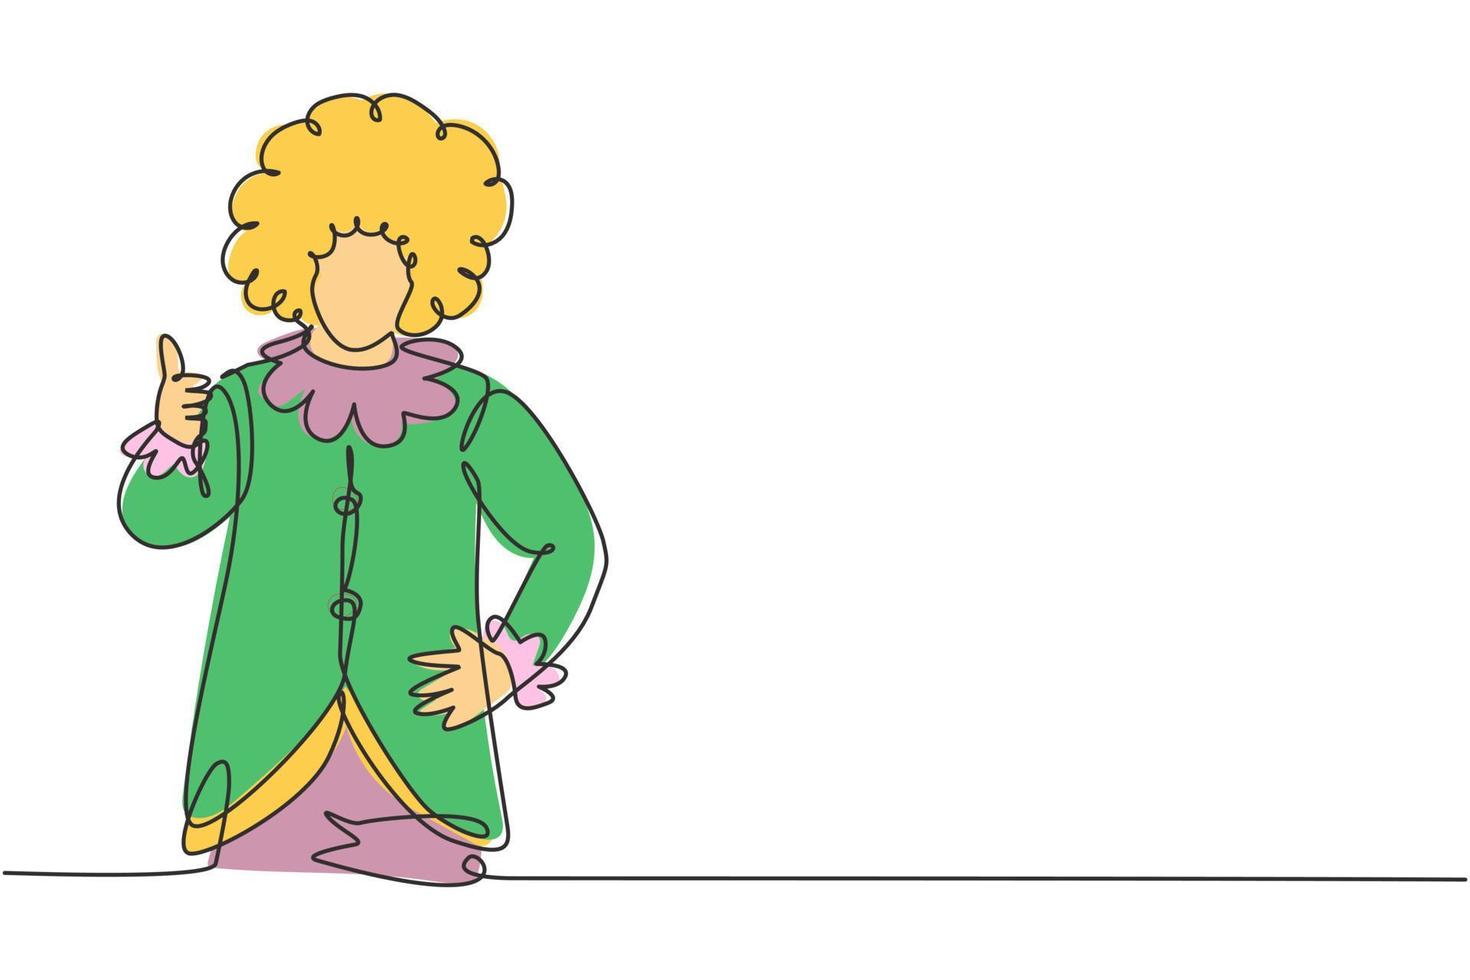 Single continuous line drawing a clown with thumbs-up gesture, wearing a wig and smiling face make-up, entertaining kids at a festive birthday. Dynamic one line draw graphic design vector illustration